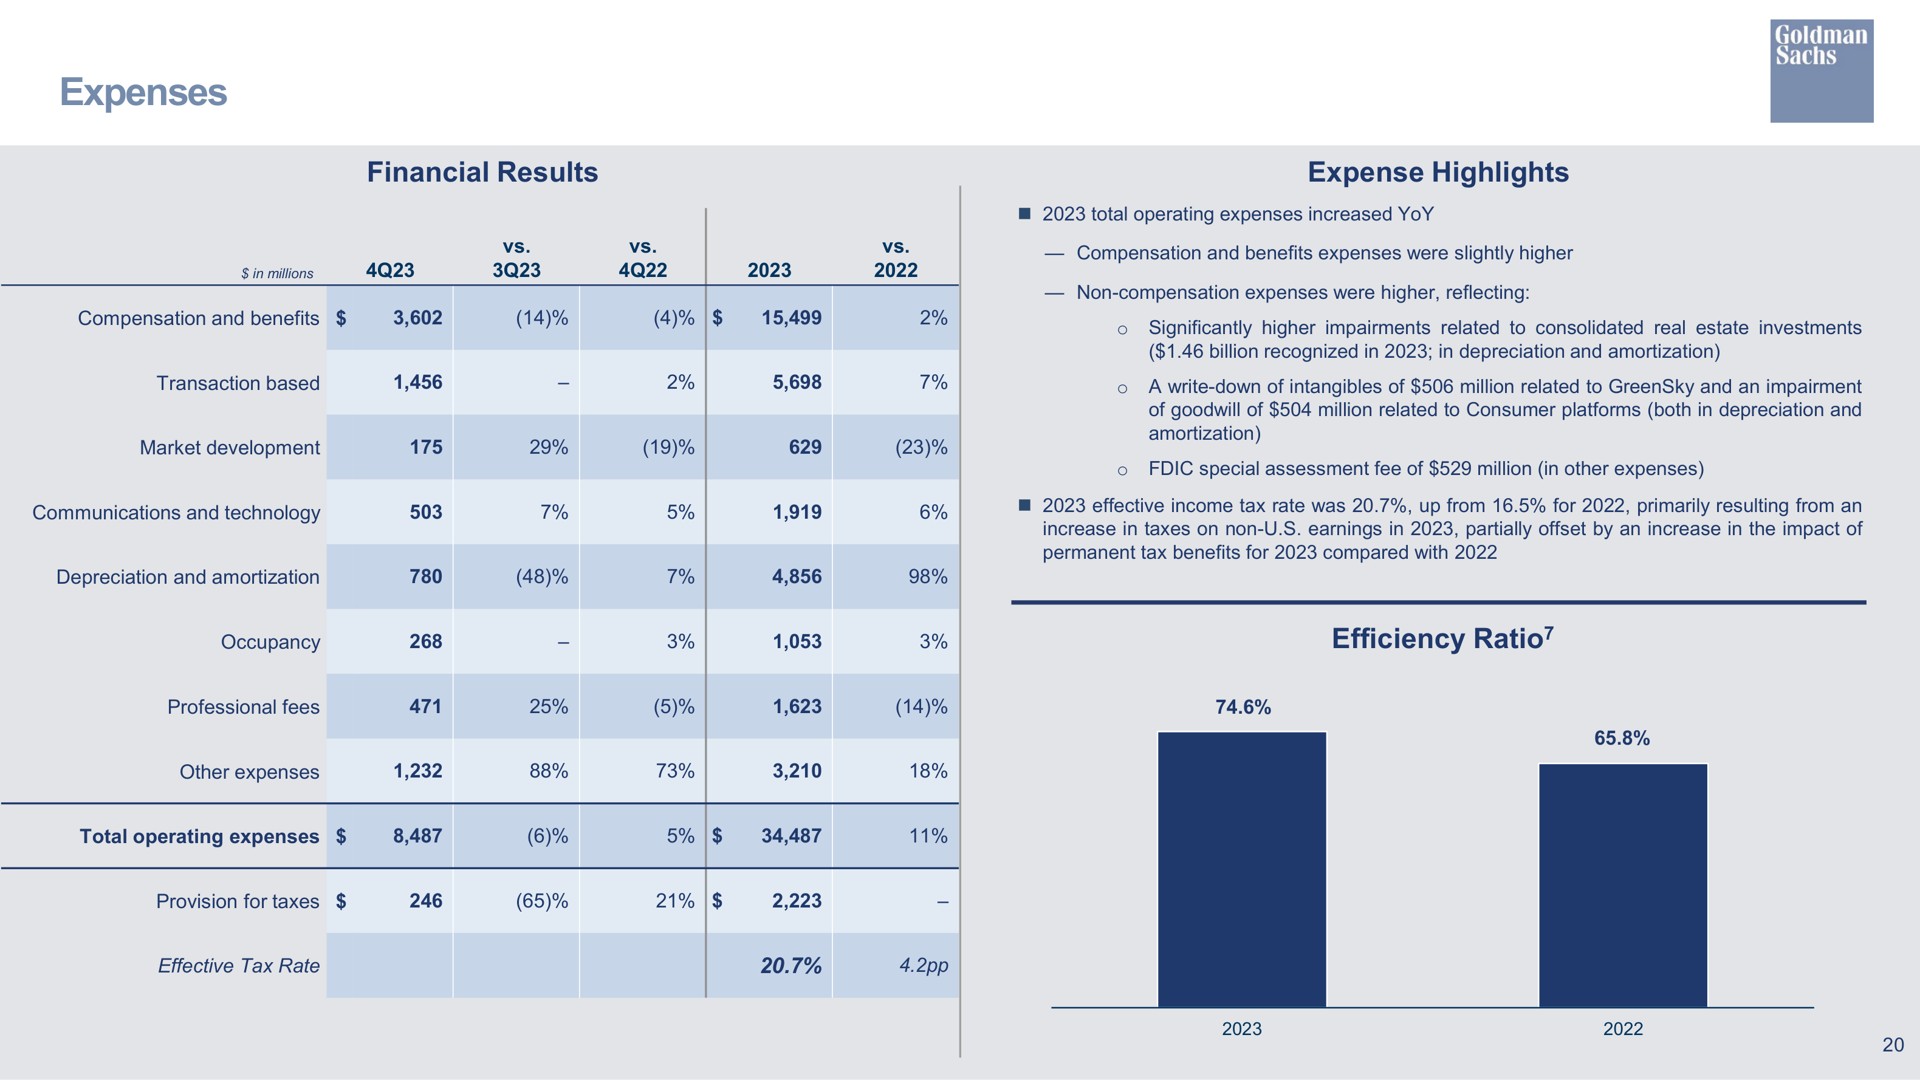 expenses financial results expense highlights efficiency ratio ratio | Goldman Sachs